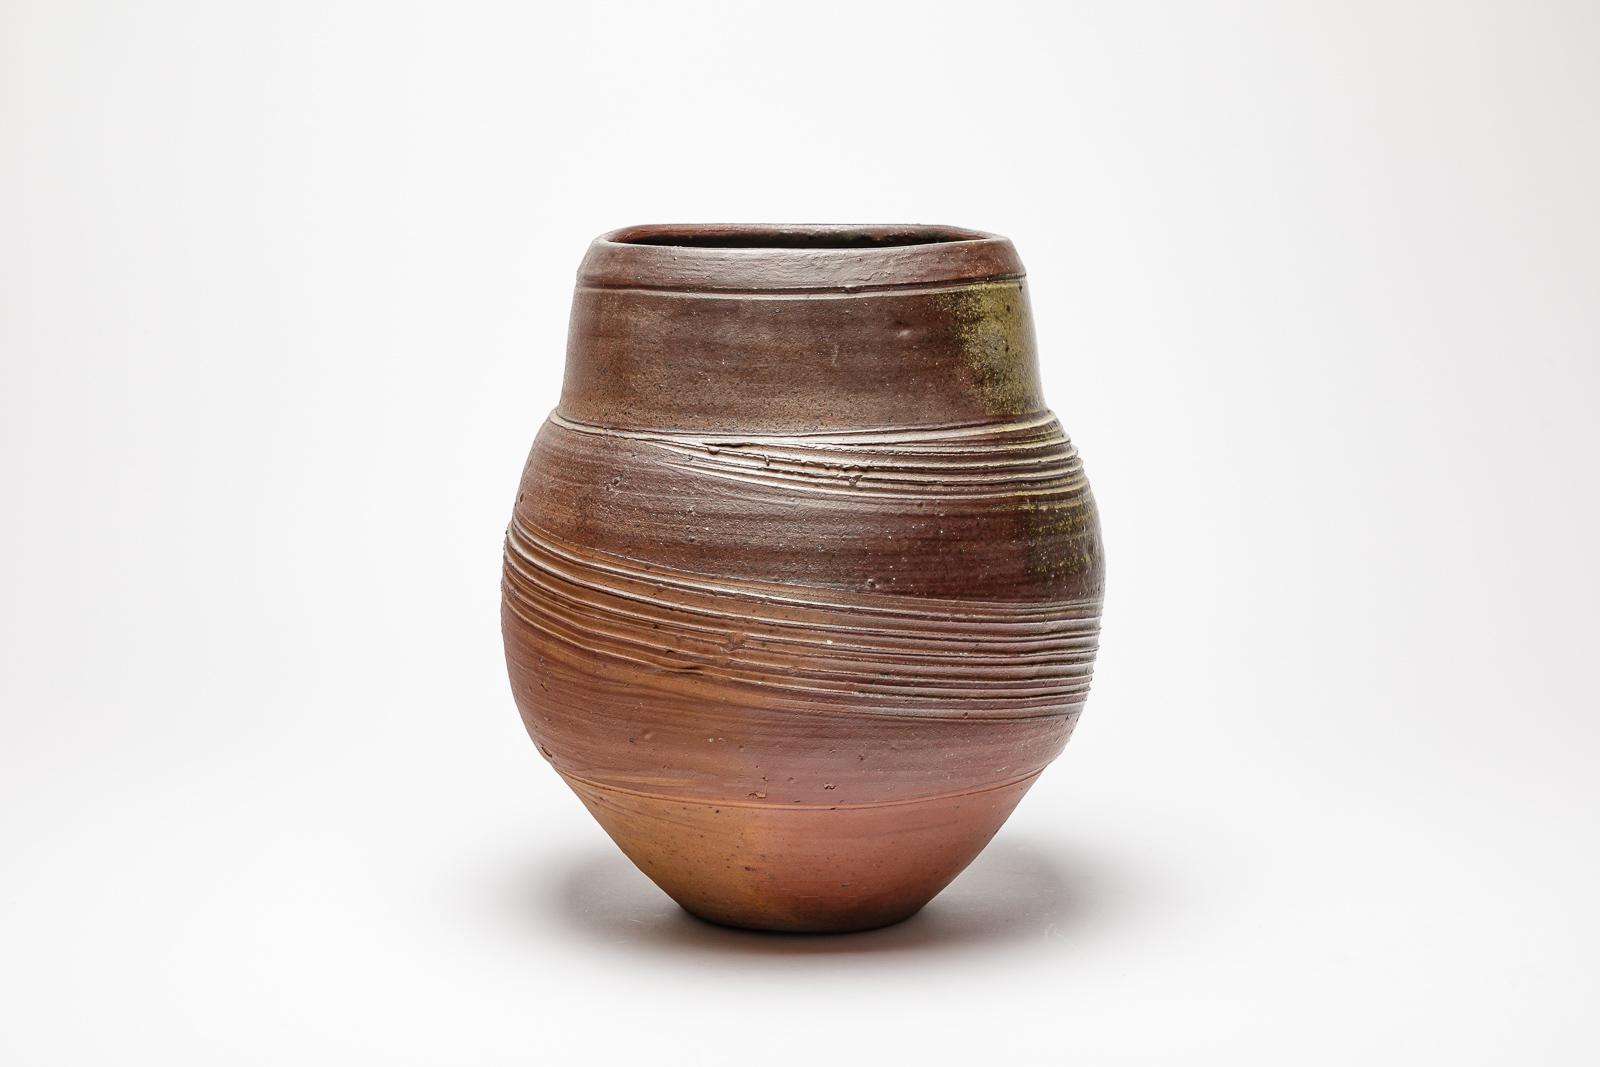 20th Century Woodfired Ceramic Vase, Eric Astoul, 1986 For Sale